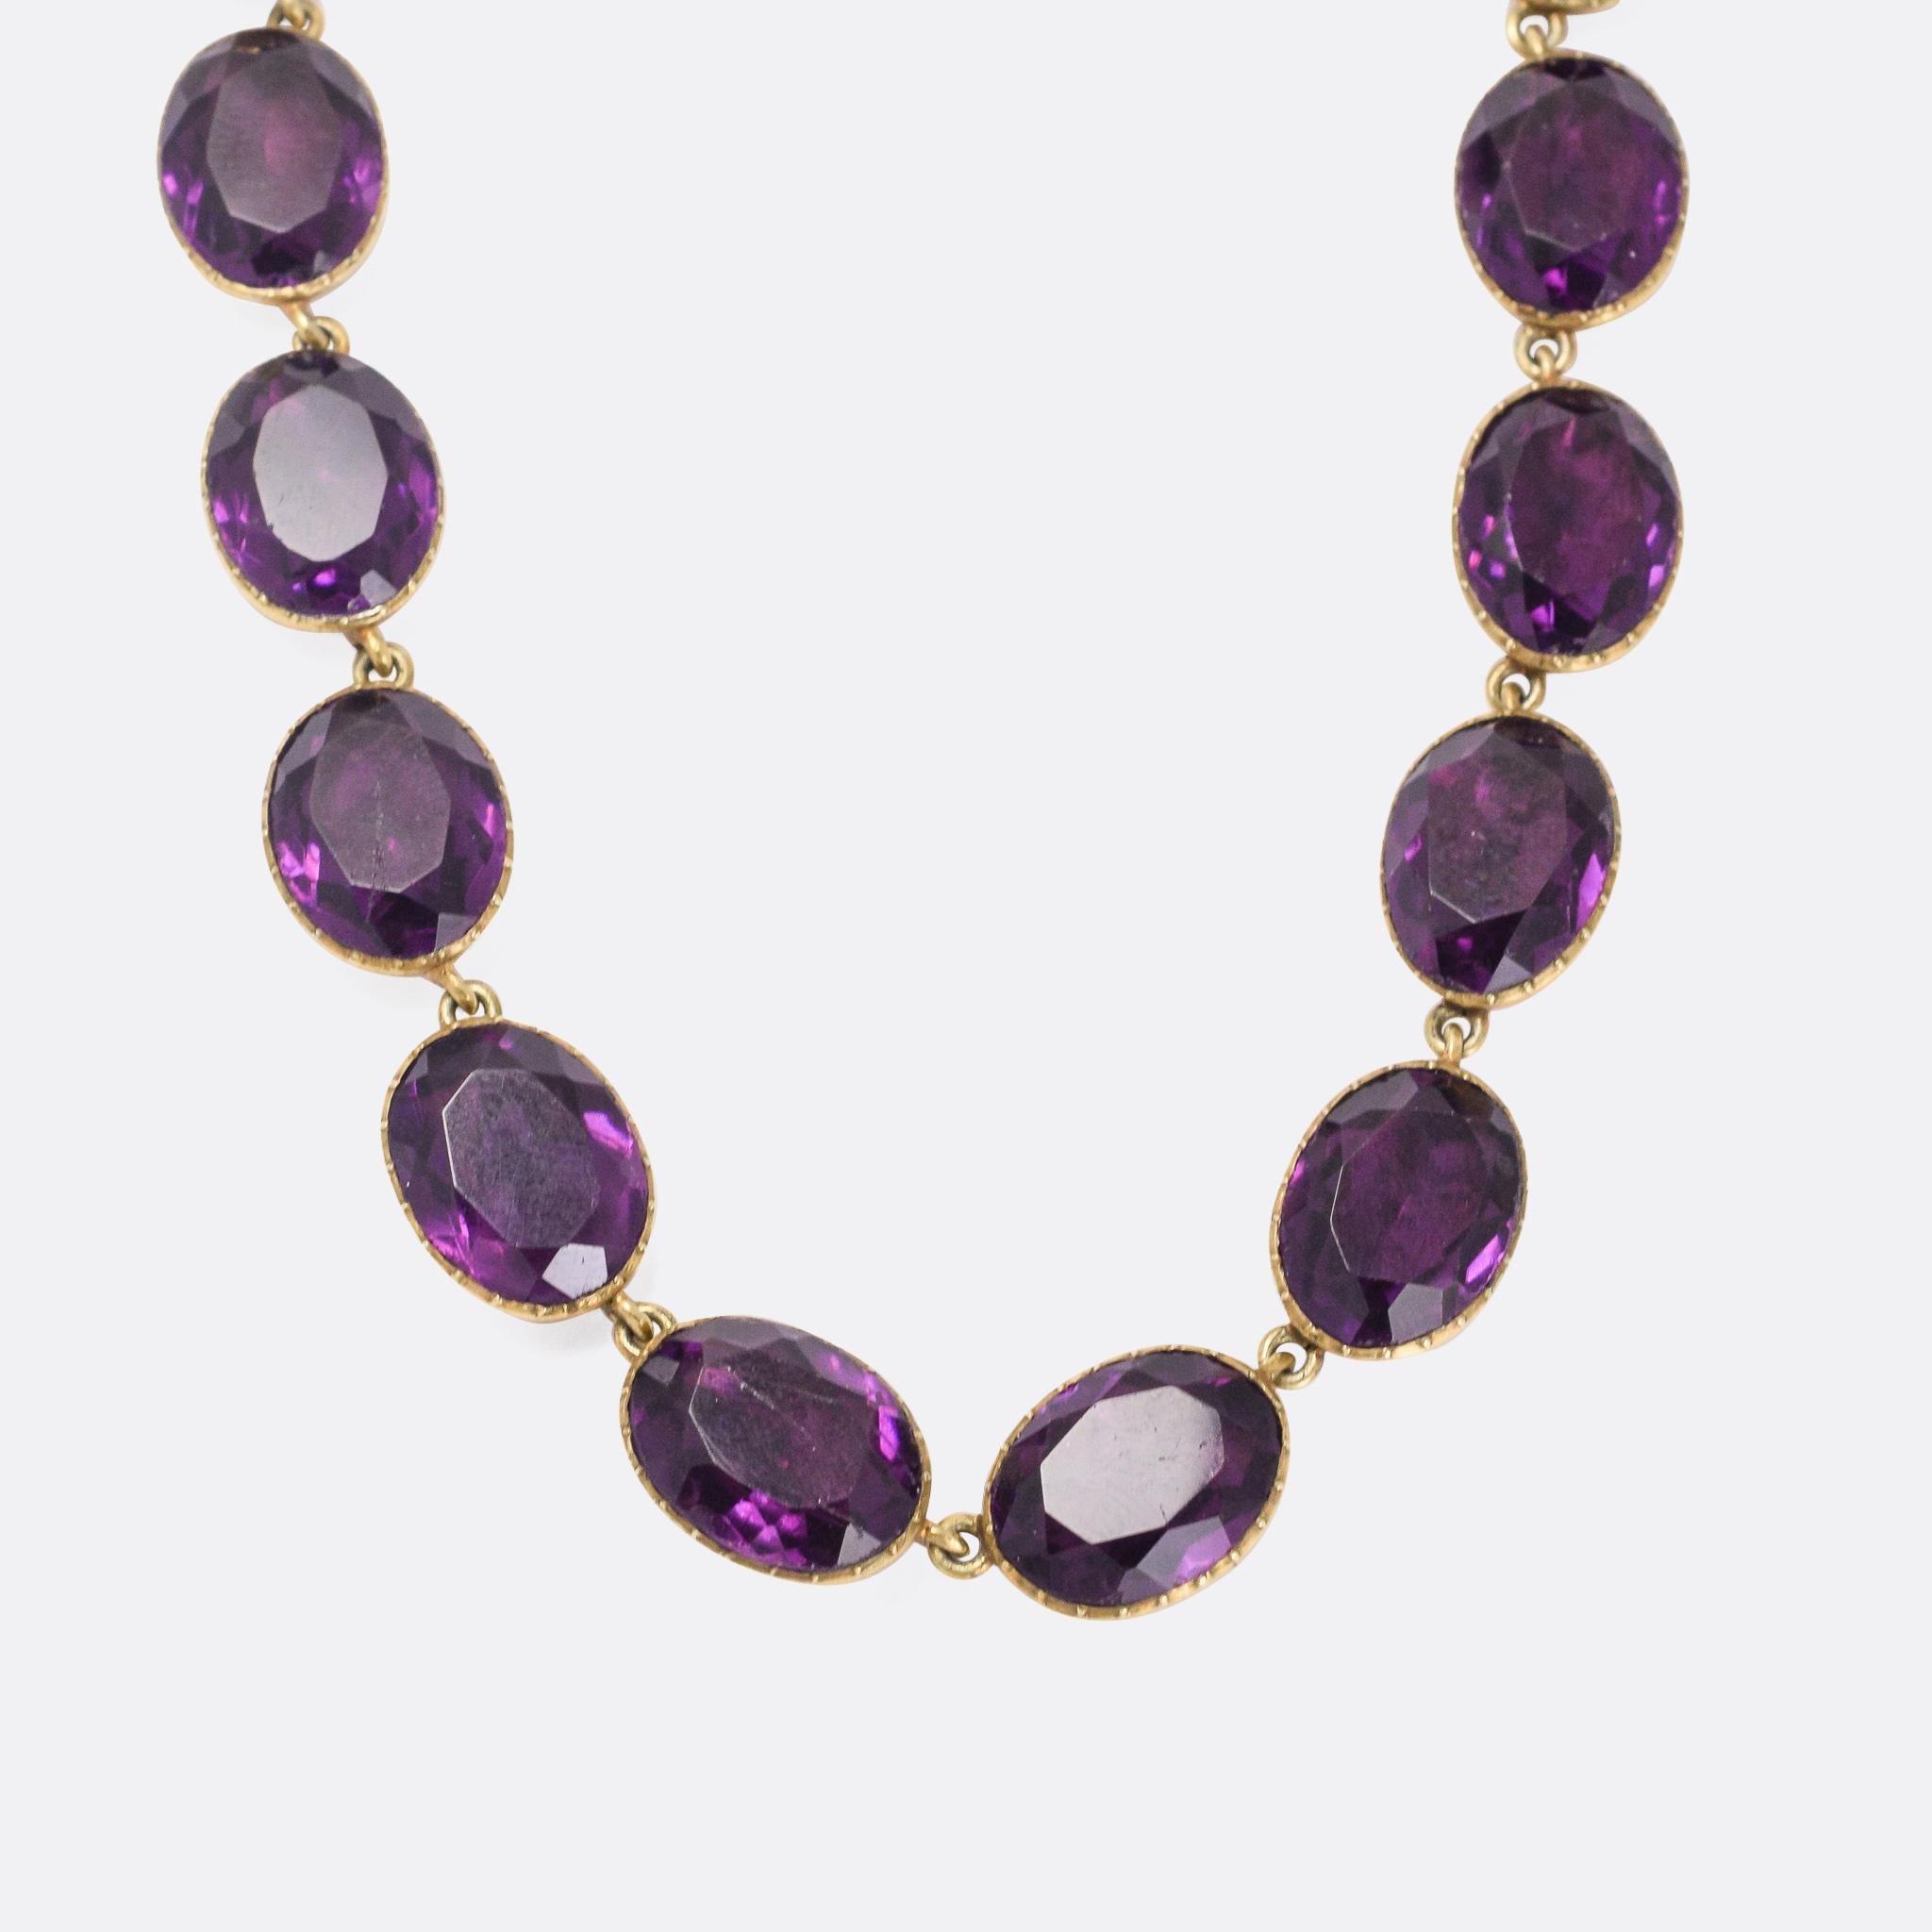 An impressive Georgian paste rivière necklace dating from the early 19th Century. It's set with 20 vibrant amethyst pastes, in pie-crust settings with foil behind to enhance their brightness. It's a very wearable length at 15 inches; and rare to